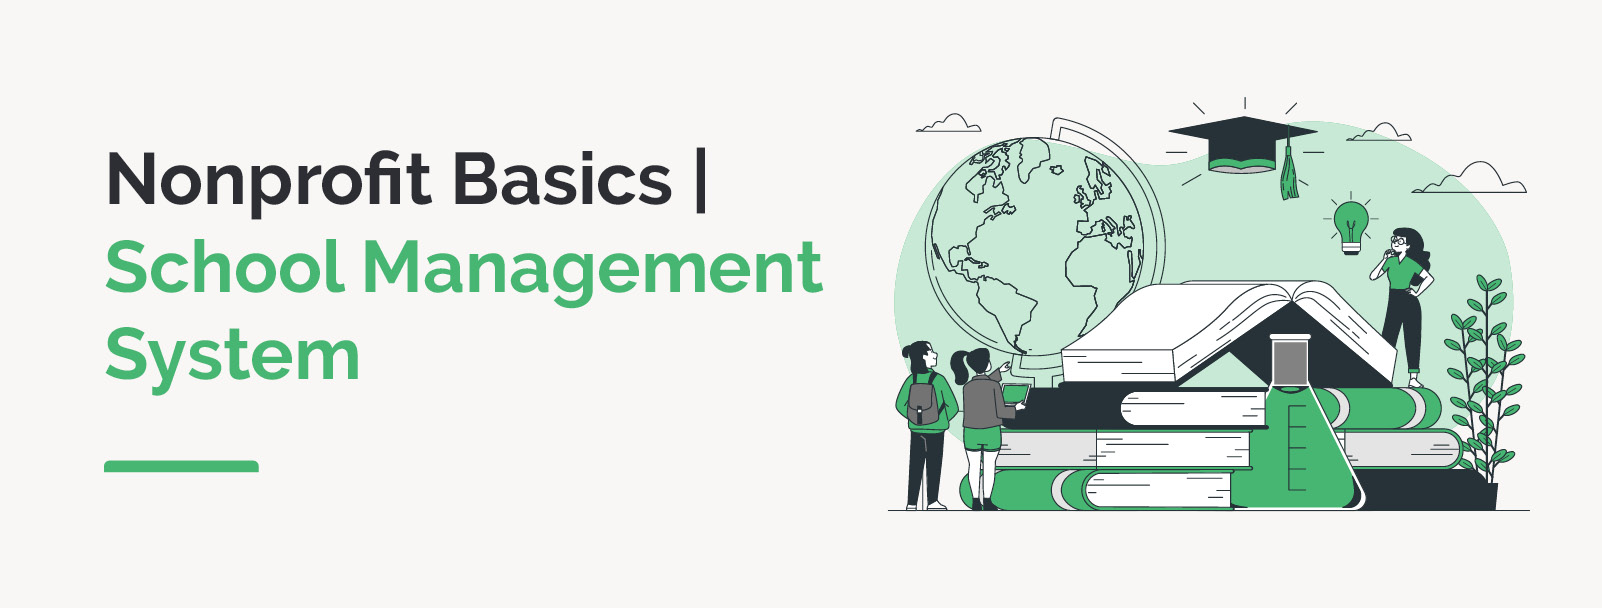 This guide walks through the basics of school management systems.